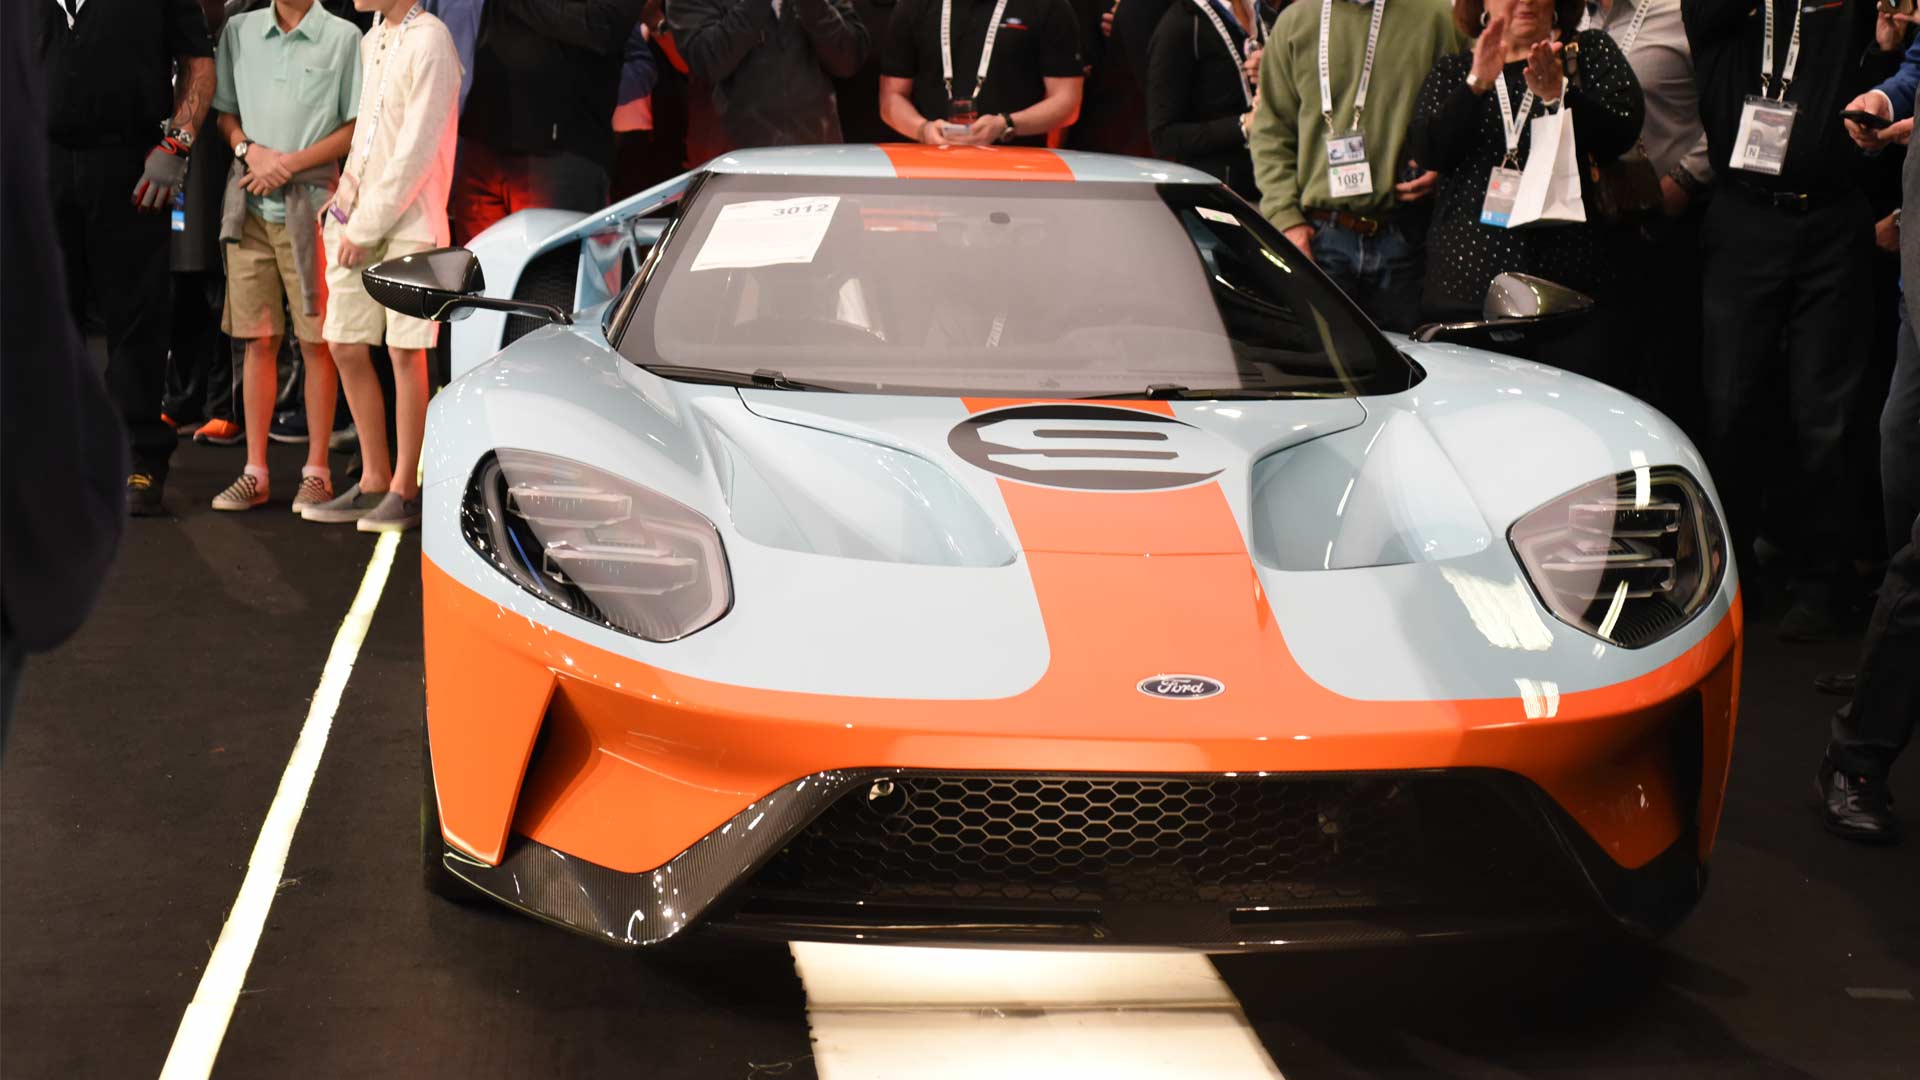 2019-Ford-GT-heritage-edition-Gulf-livery-Barrett-Jackson-auction